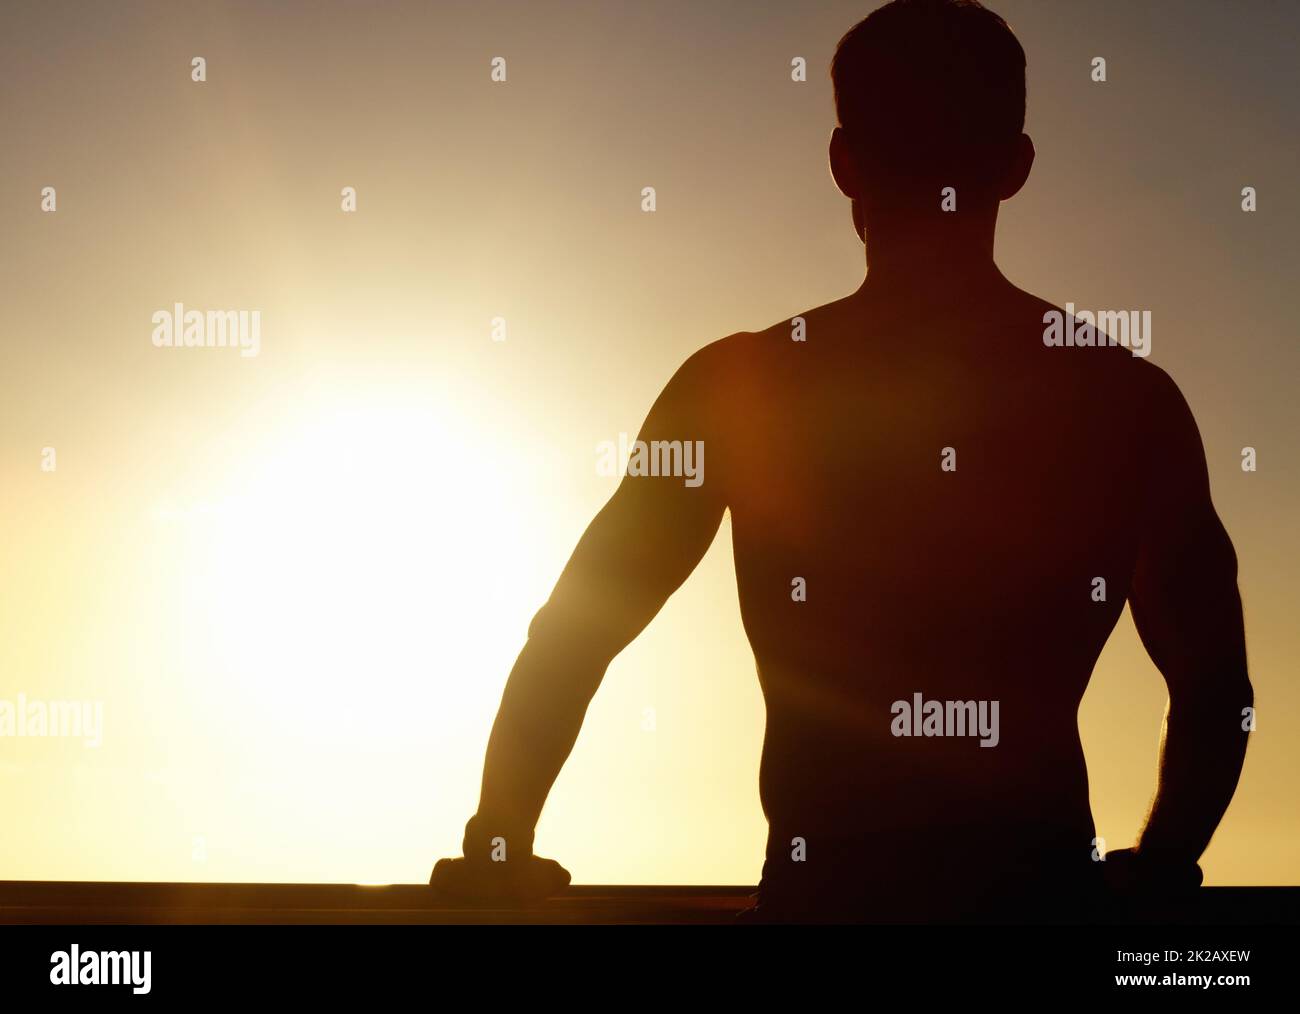 Facing a bright future. A silhouette of a muscular man looking at the sunset. Stock Photo